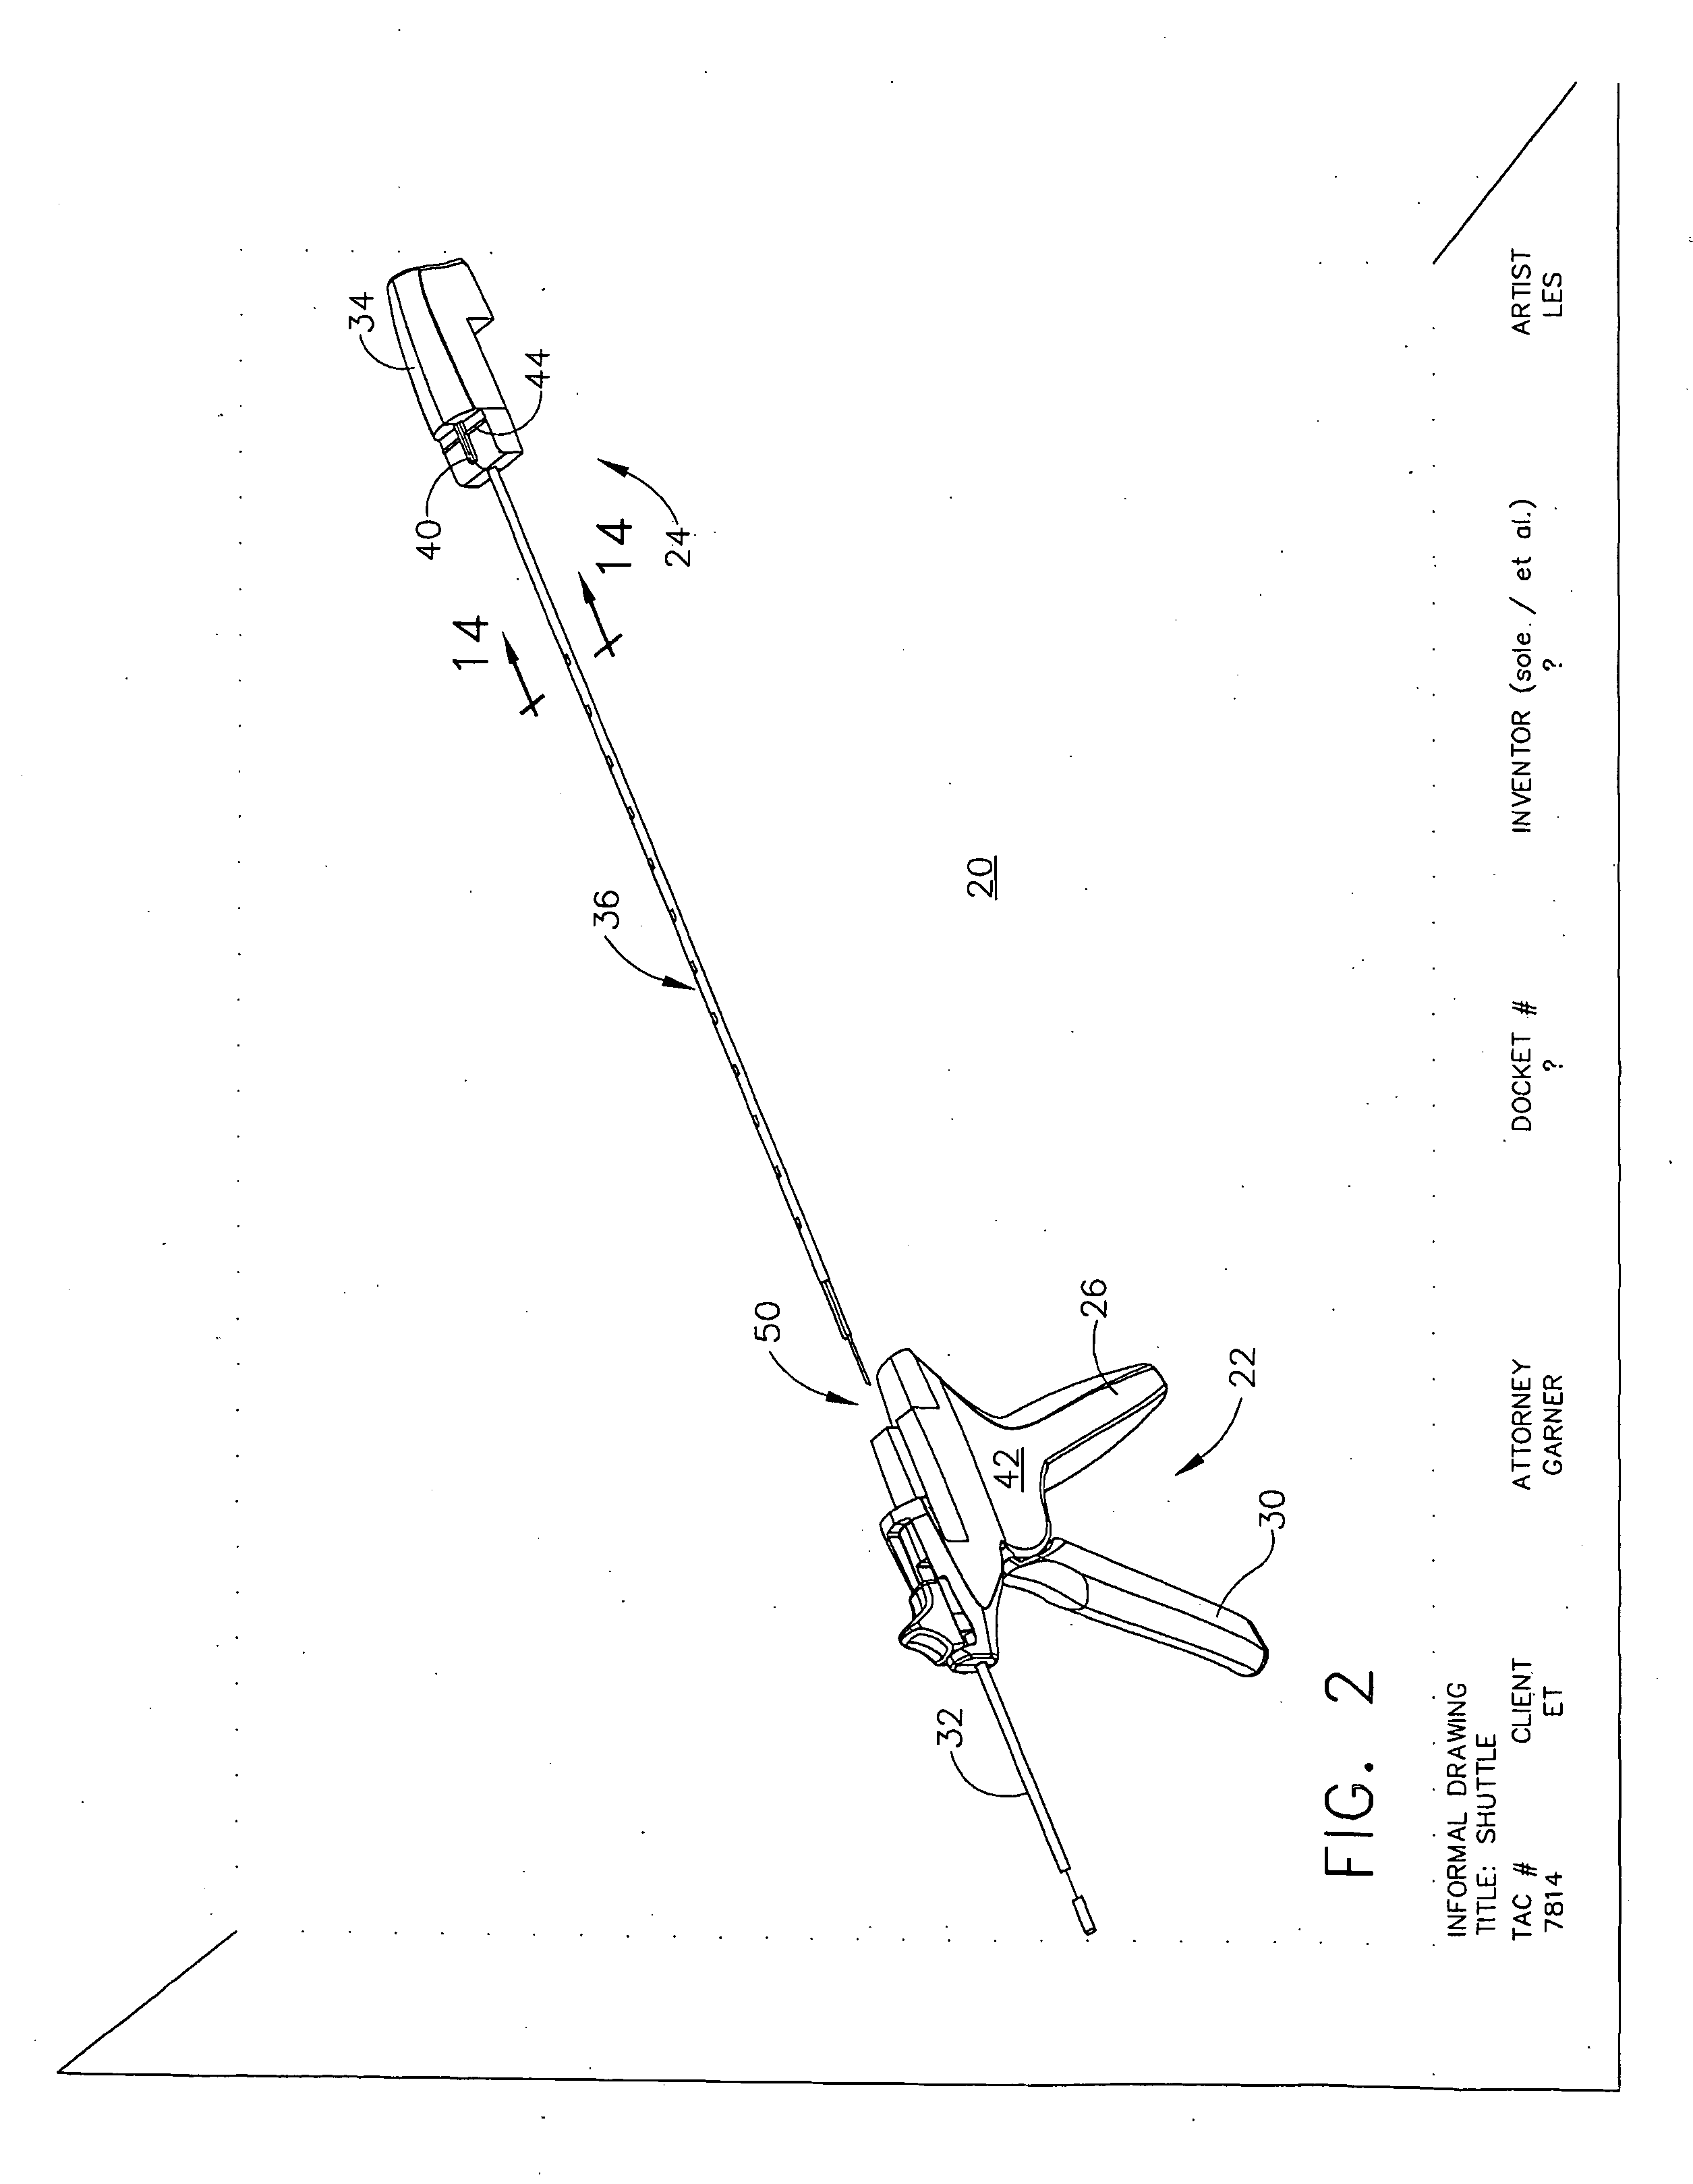 Reloadable laparoscopic fastener deploying device with disposable cartridge for use in a gastric volume reduction procedure